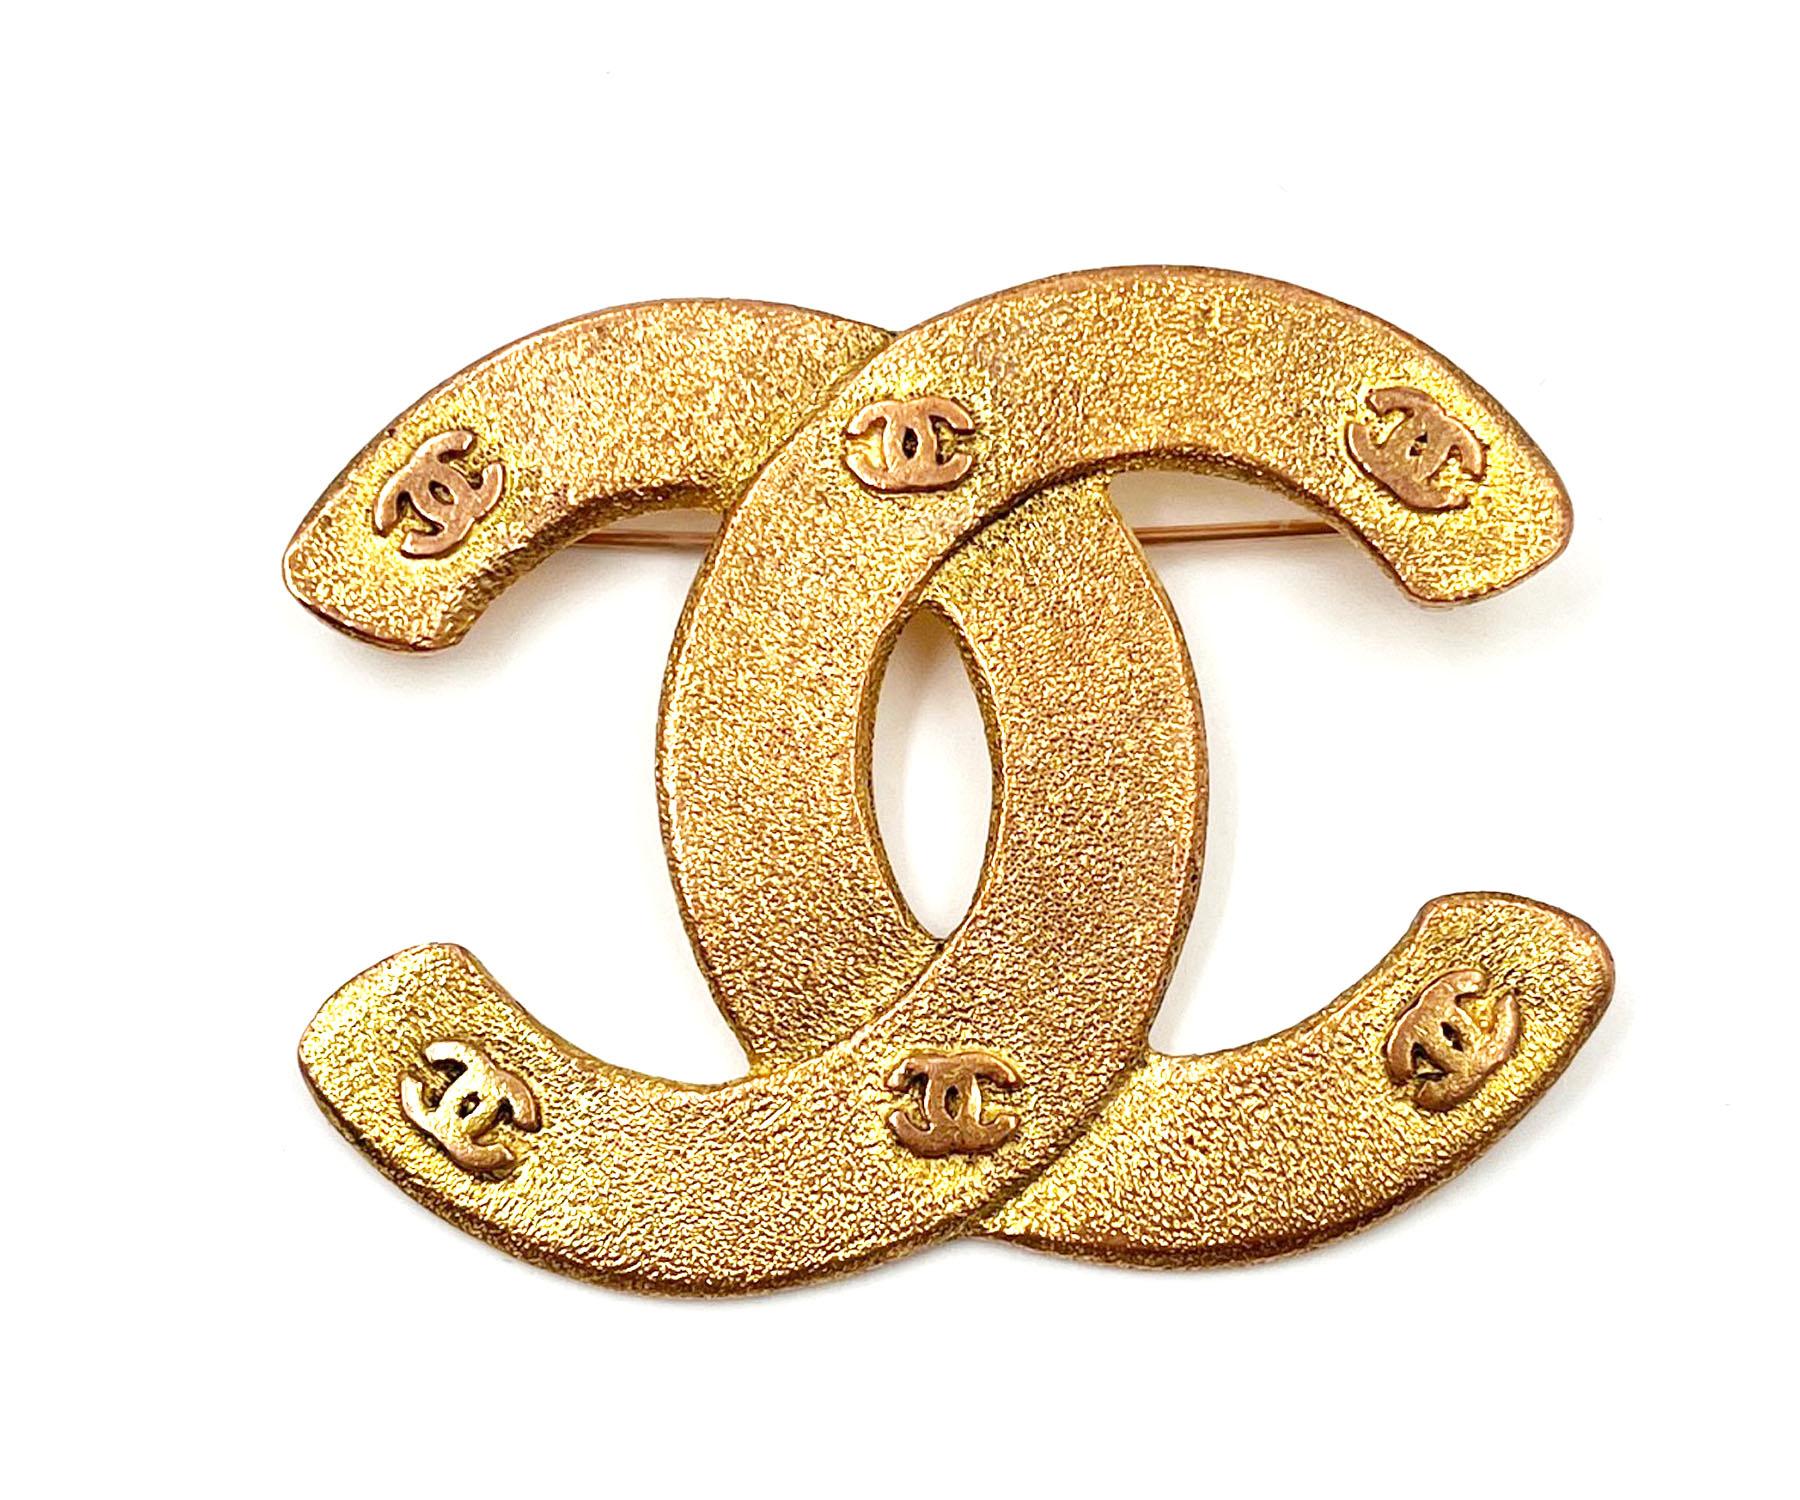 Chanel Vintage Gold Plated Matte CC Mini CC Large Brooch

* Marked Season 29 and 1263
* Made in France

-It is approximately 1.25